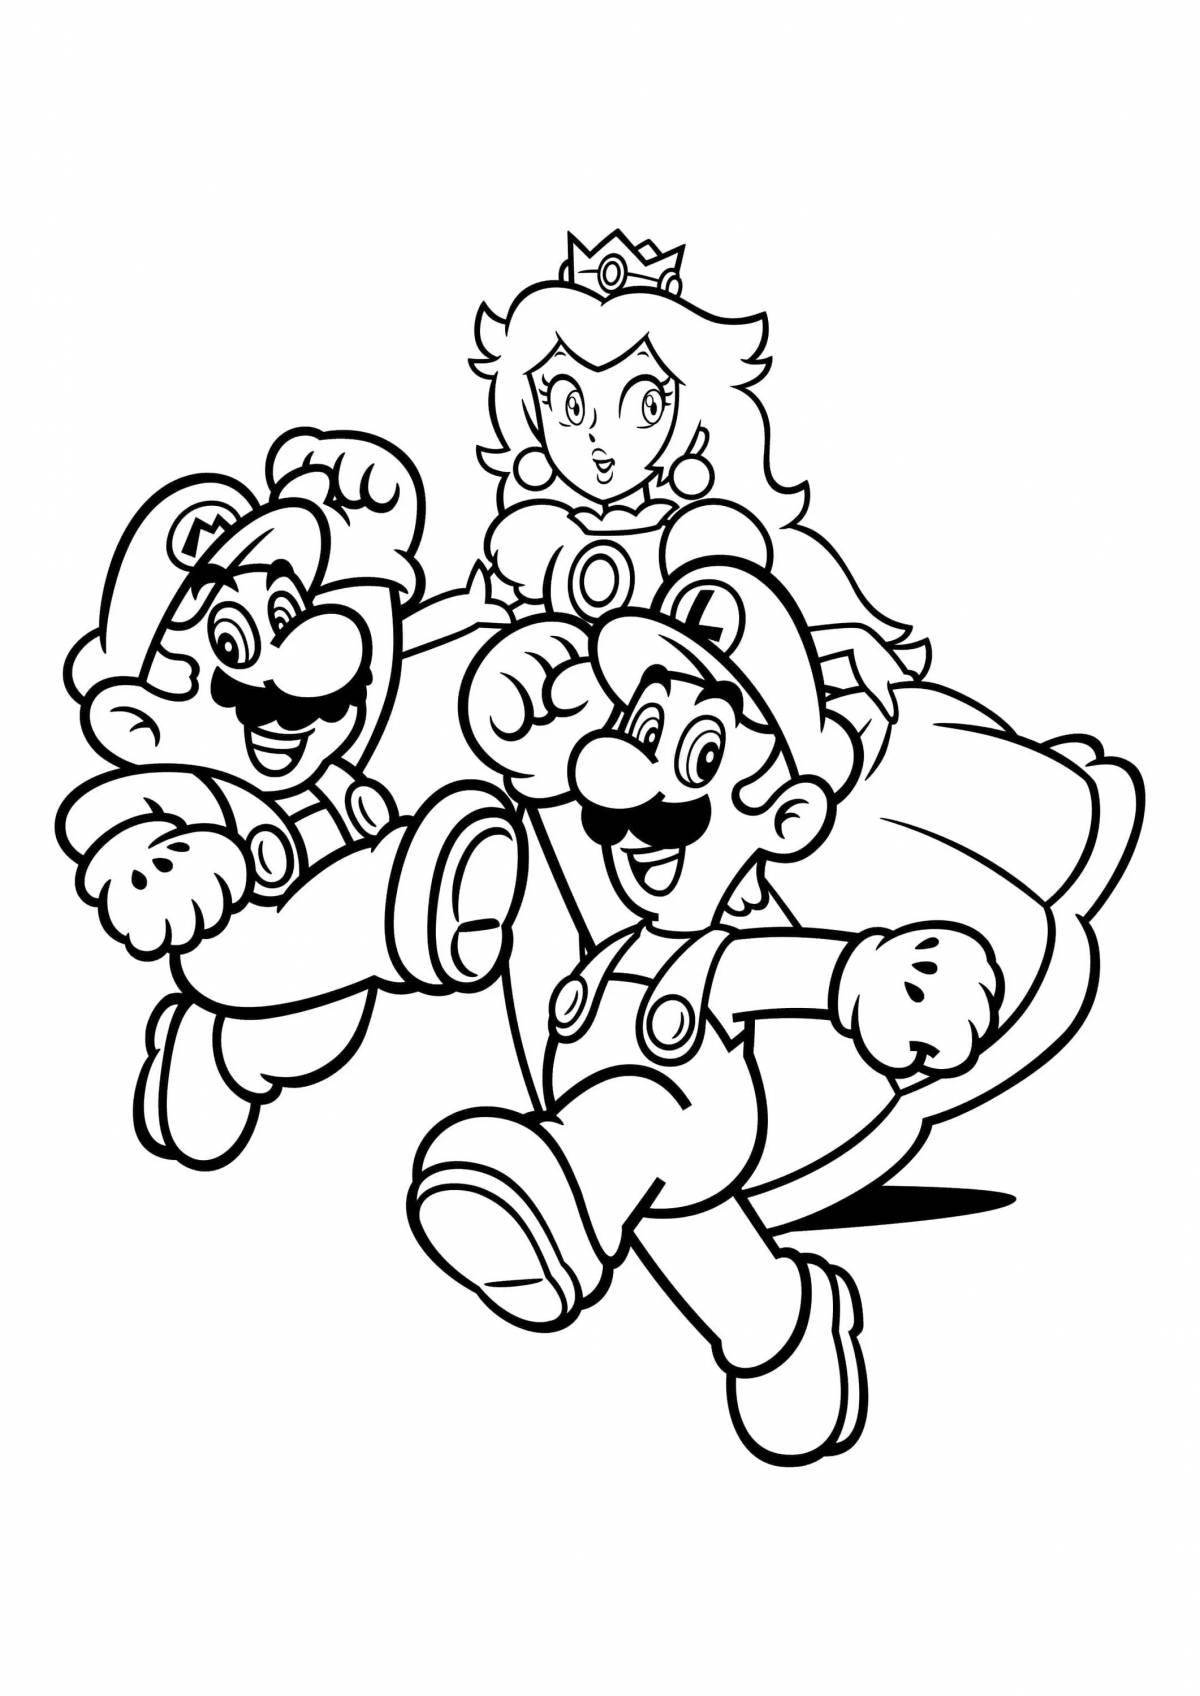 Luigi and mario coloring pages